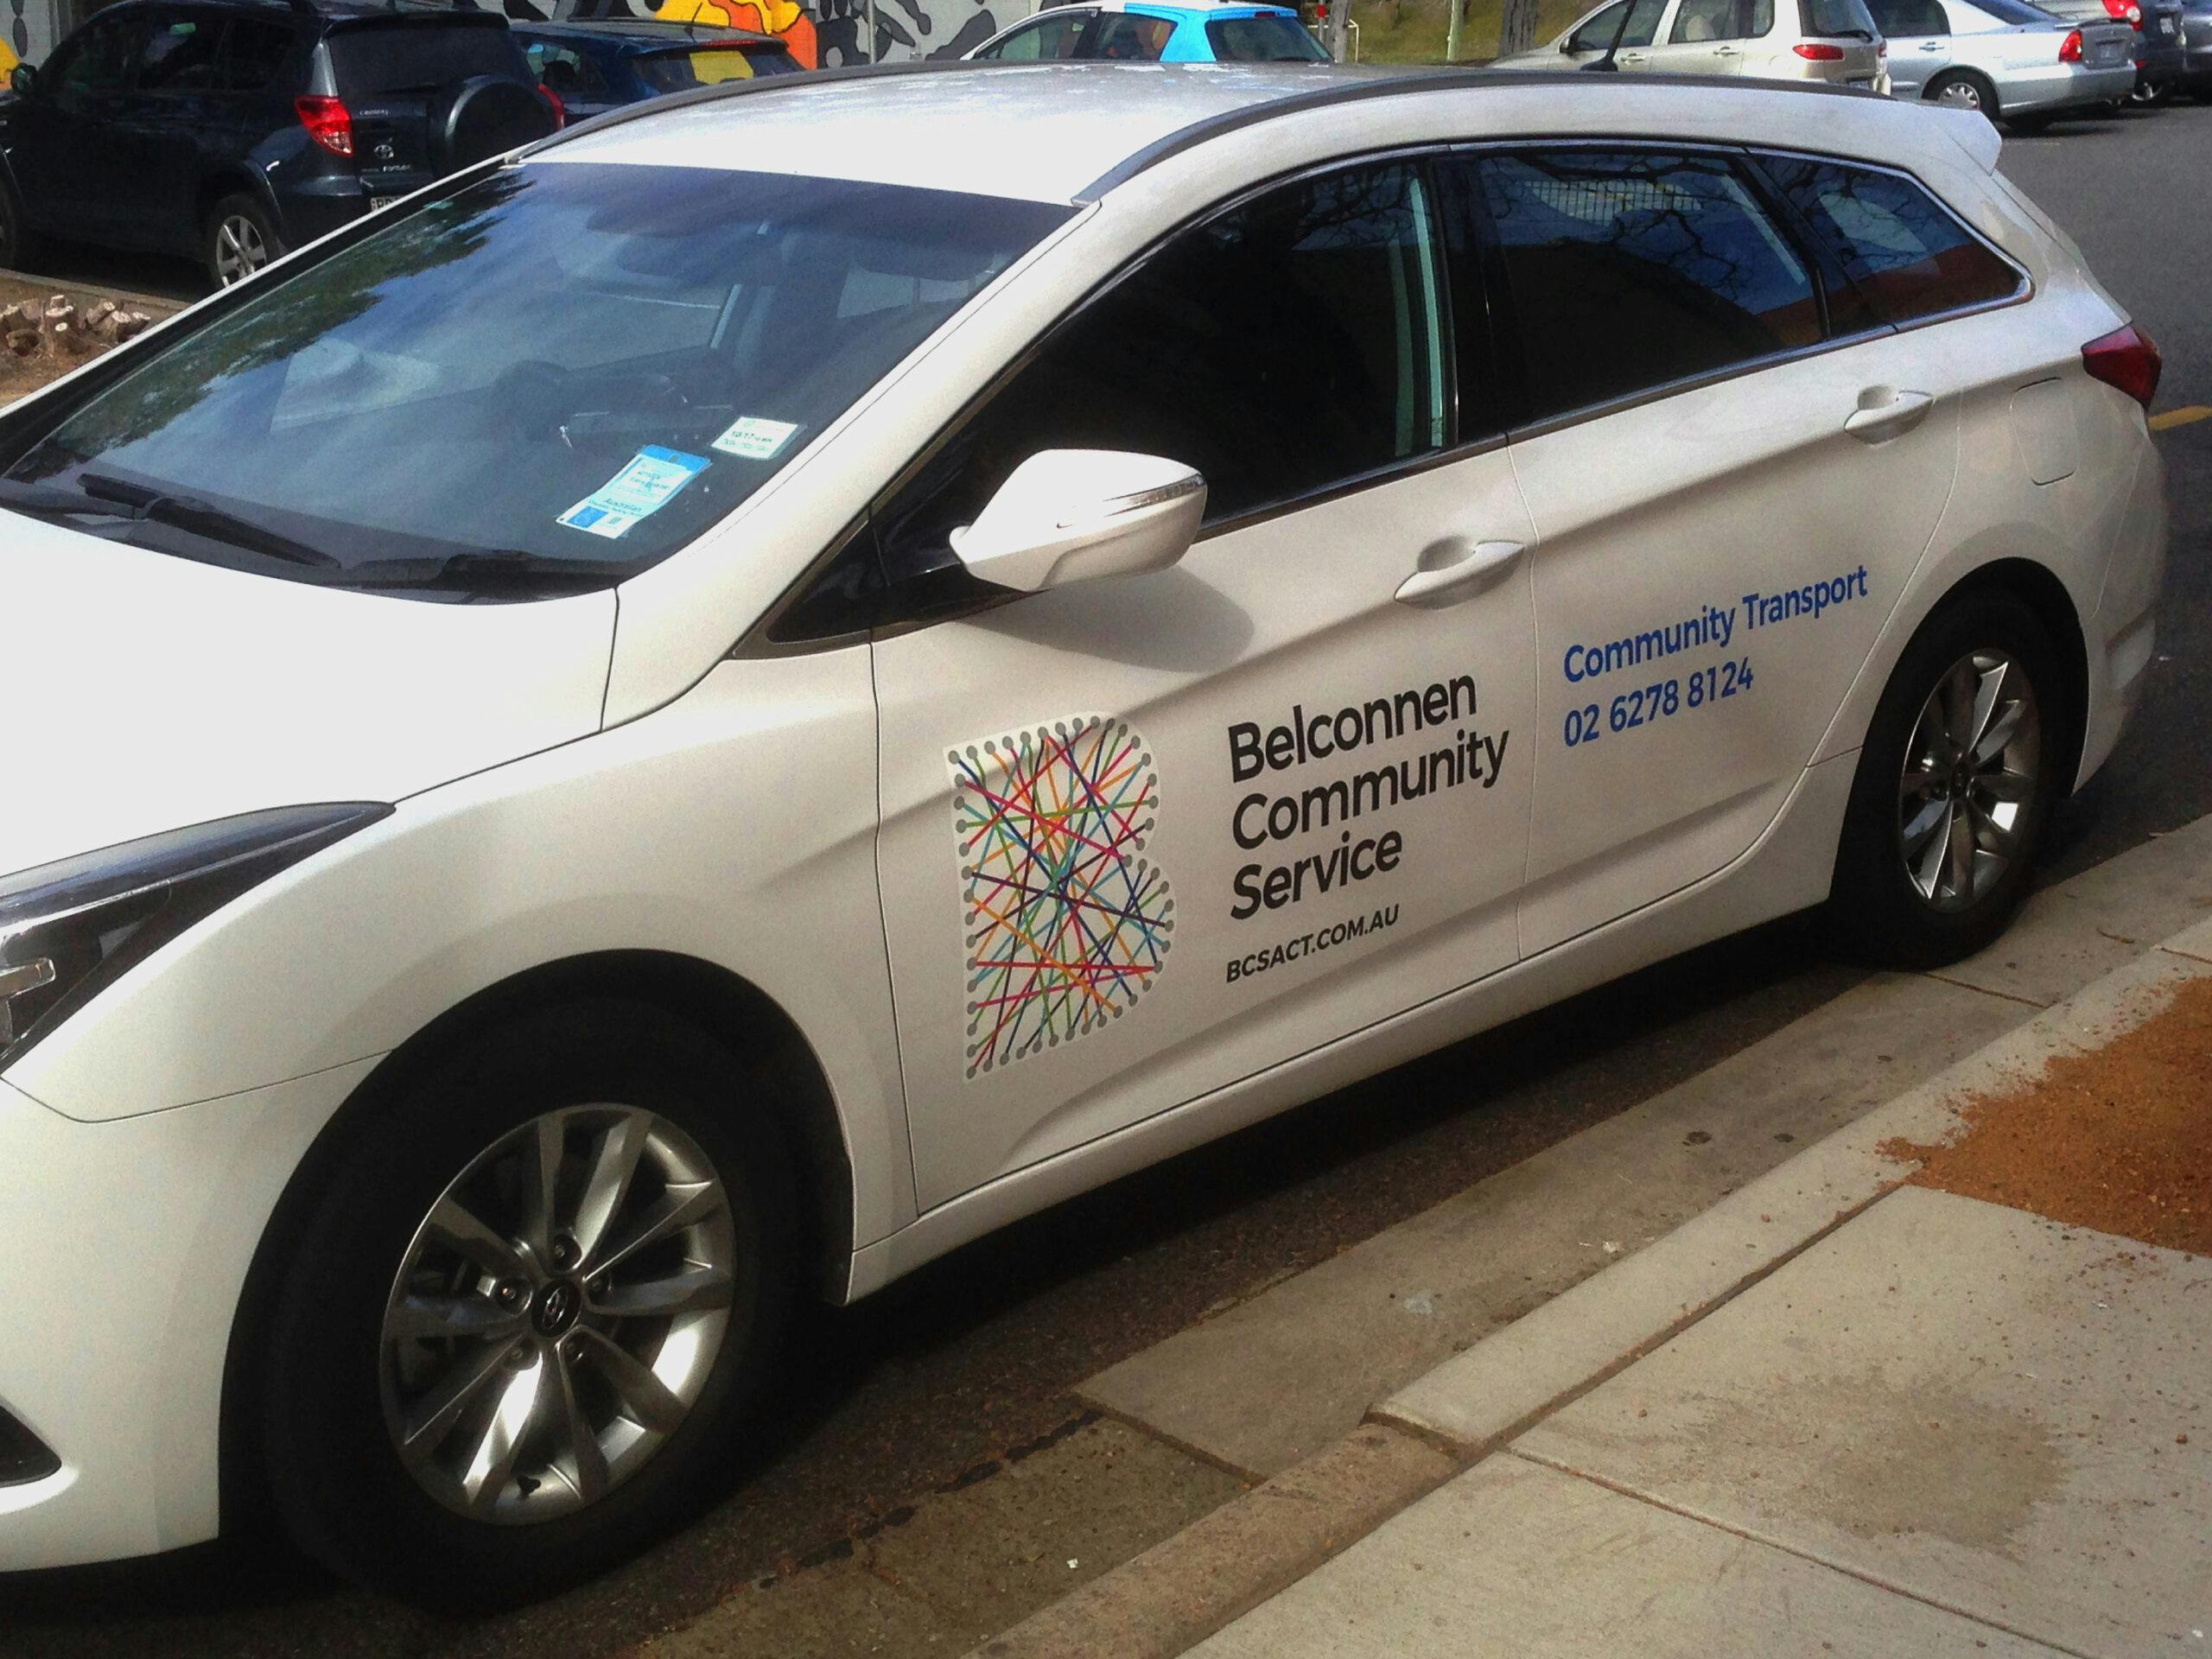 A photo of a CRCS transport vehicle parked on the side of a curb, the car is white.